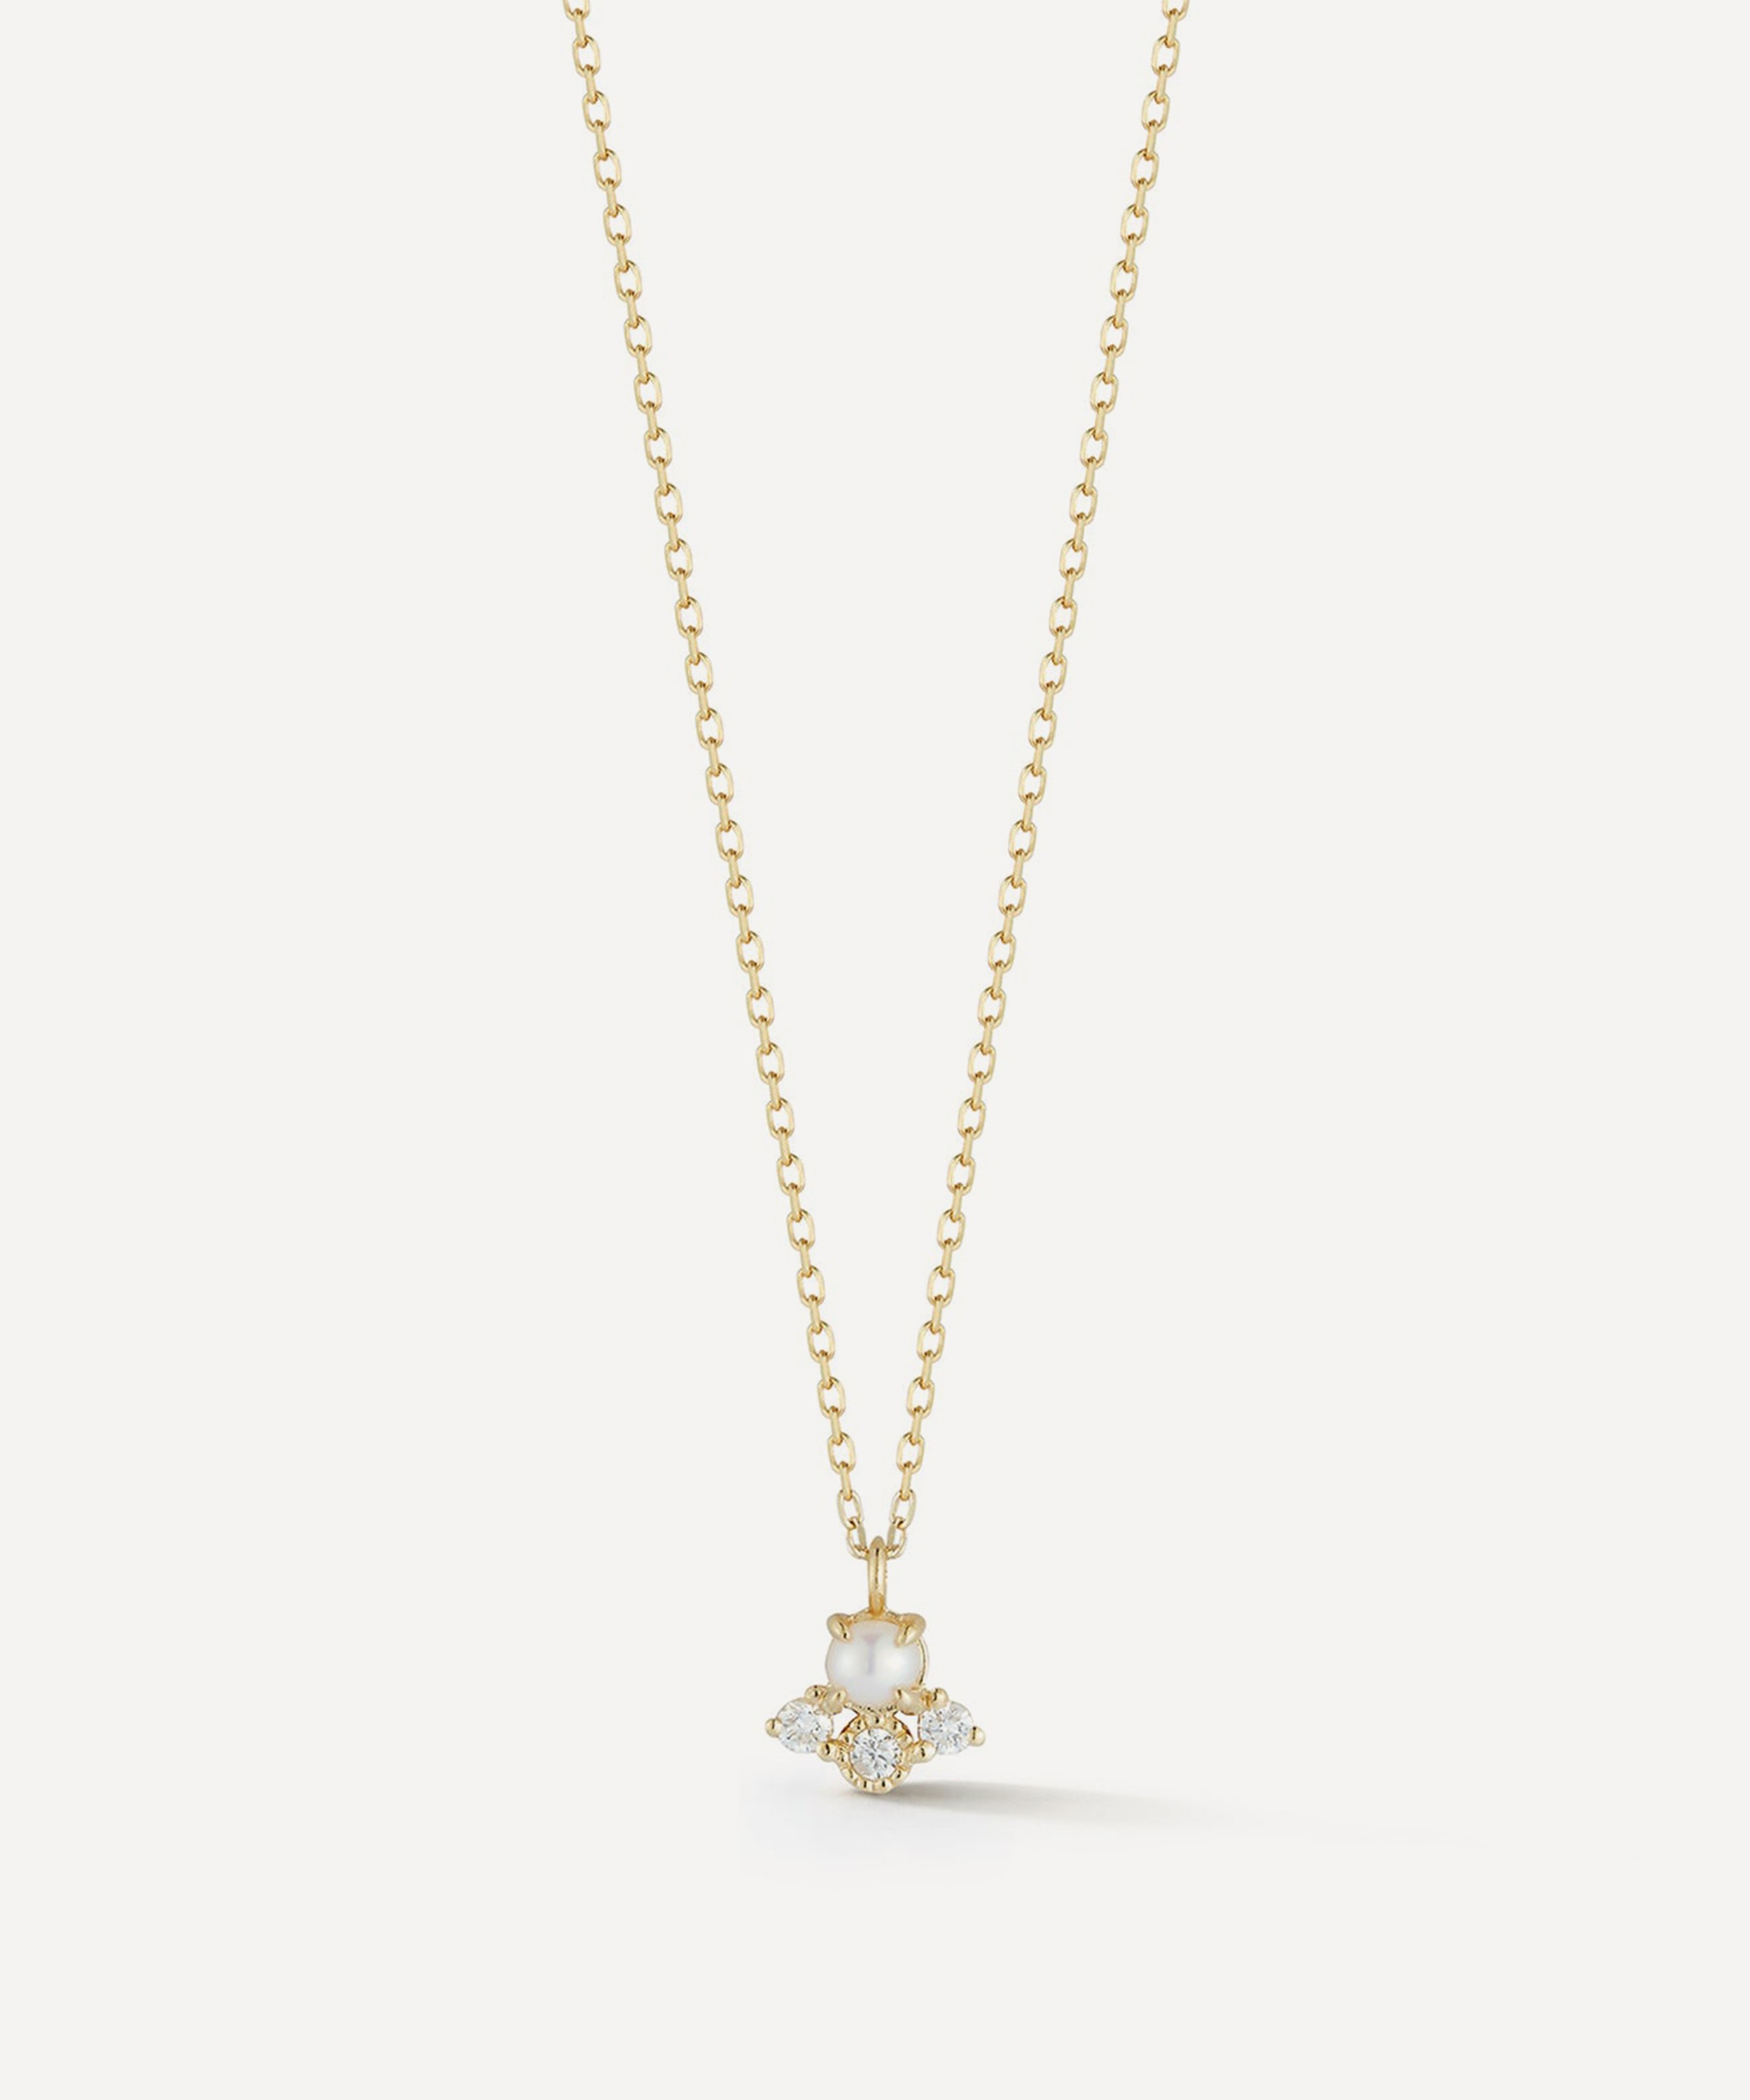 Mateo - 14ct Gold The Little Things Pearl and Diamond Pendant Necklace